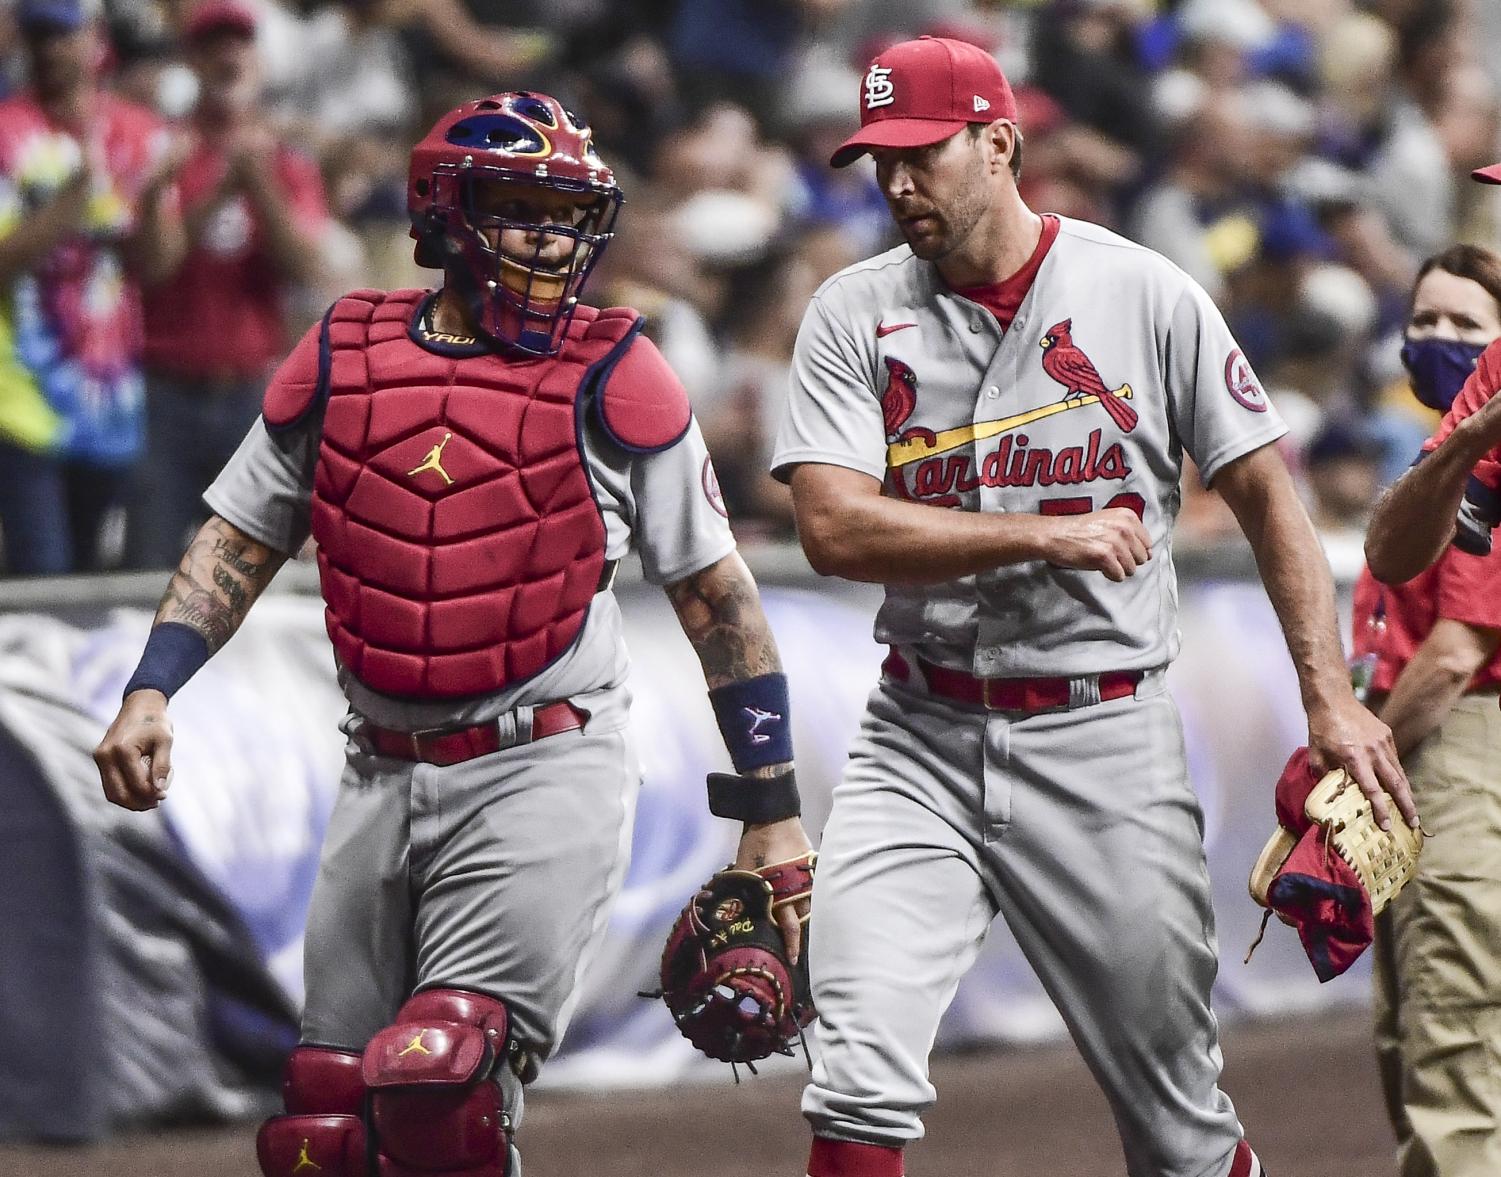 Why Yadier Molina, not Buster Posey, is the best catcher of his